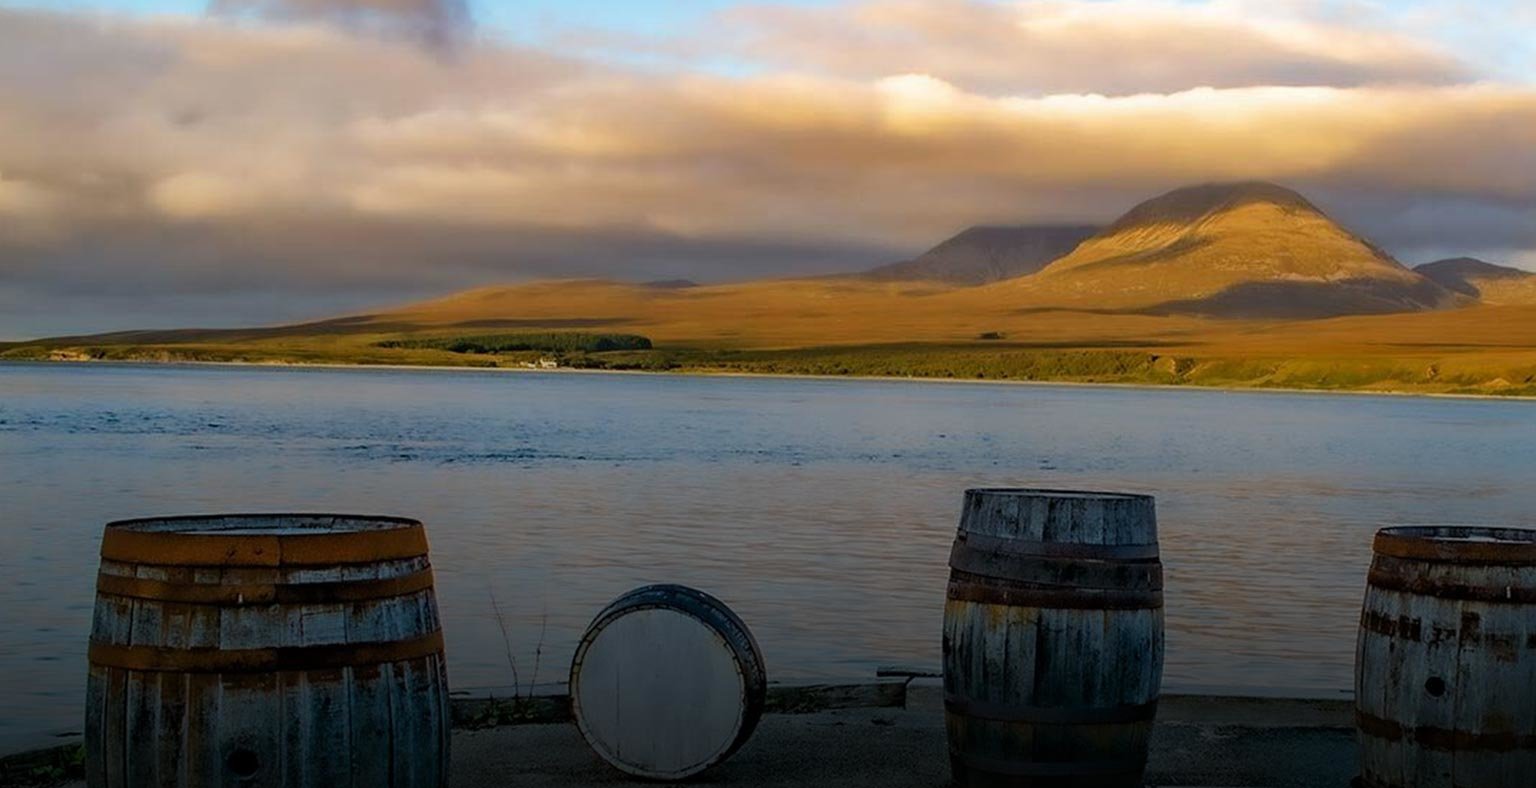 Whisky barrels facing the ocean with mountains in the background